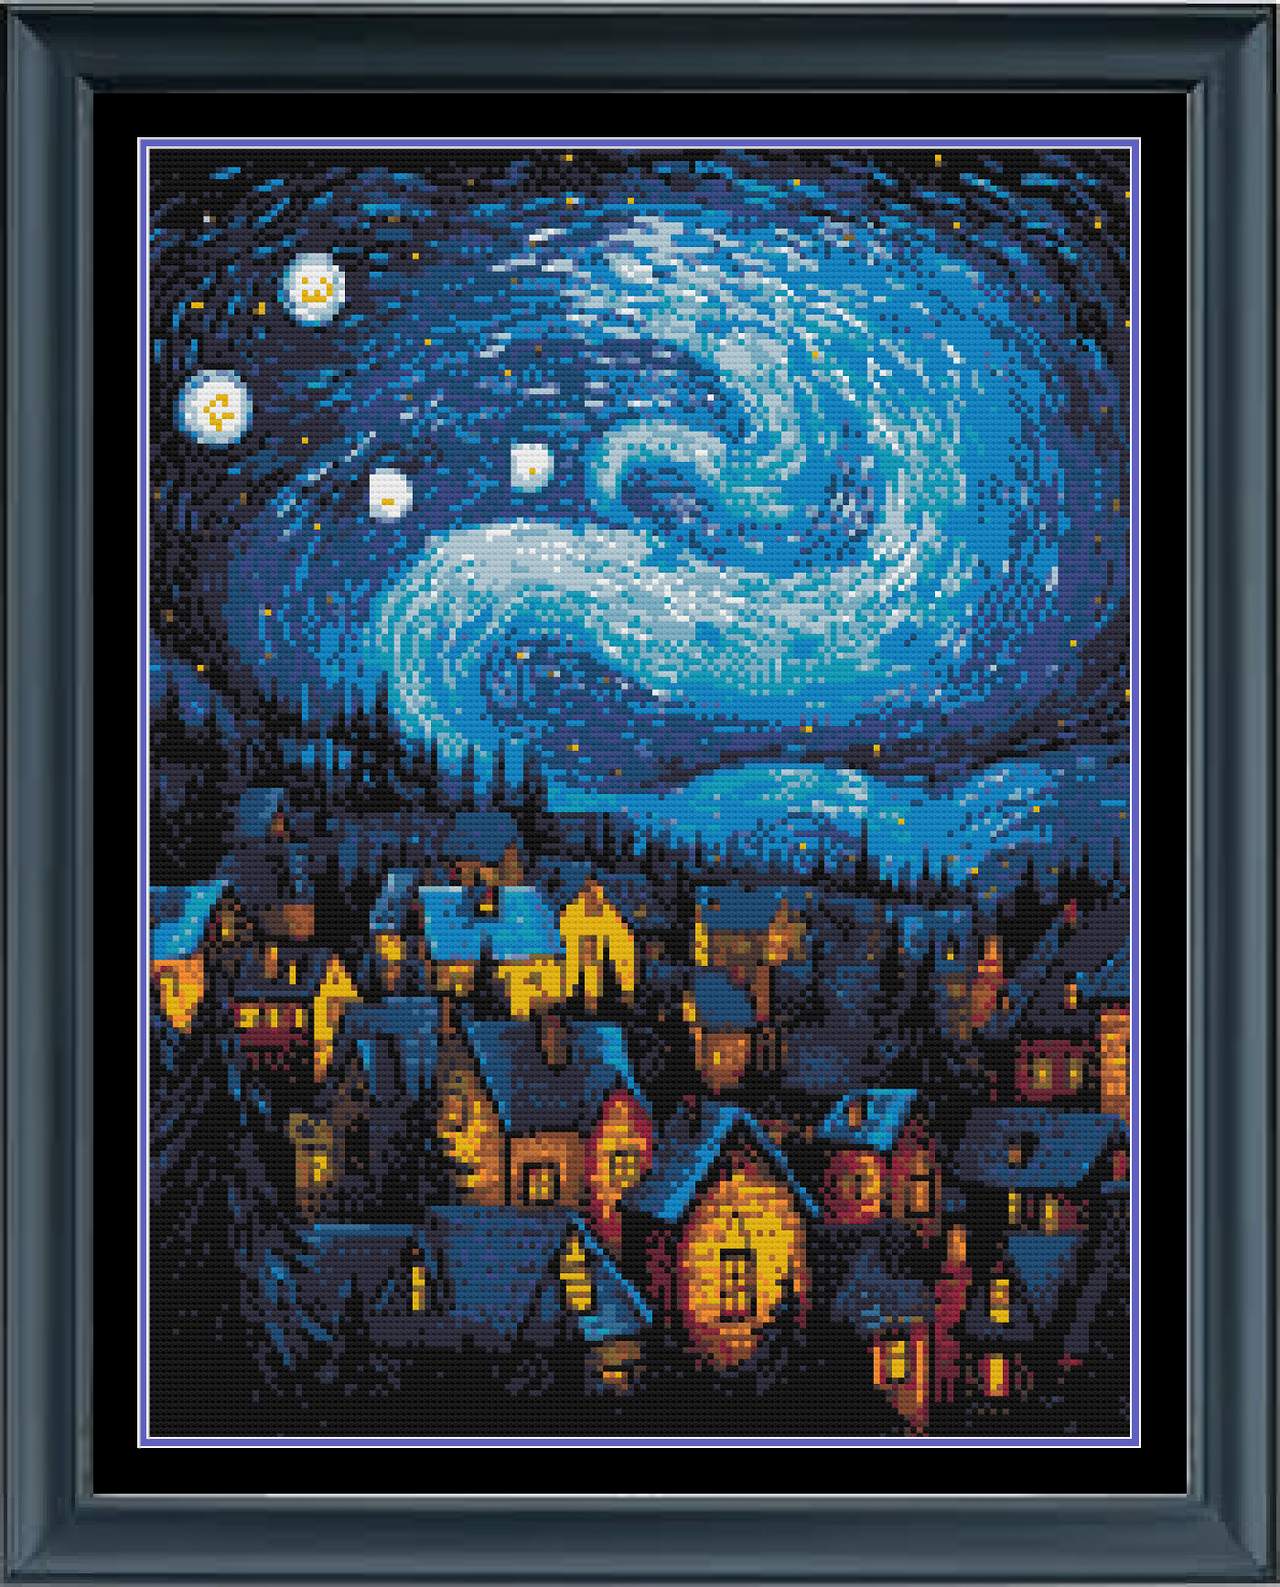 Winter Village Starry Night Van Gogh Counted Cross Stitch Pattern | Full Coverage | Instant Download PDF